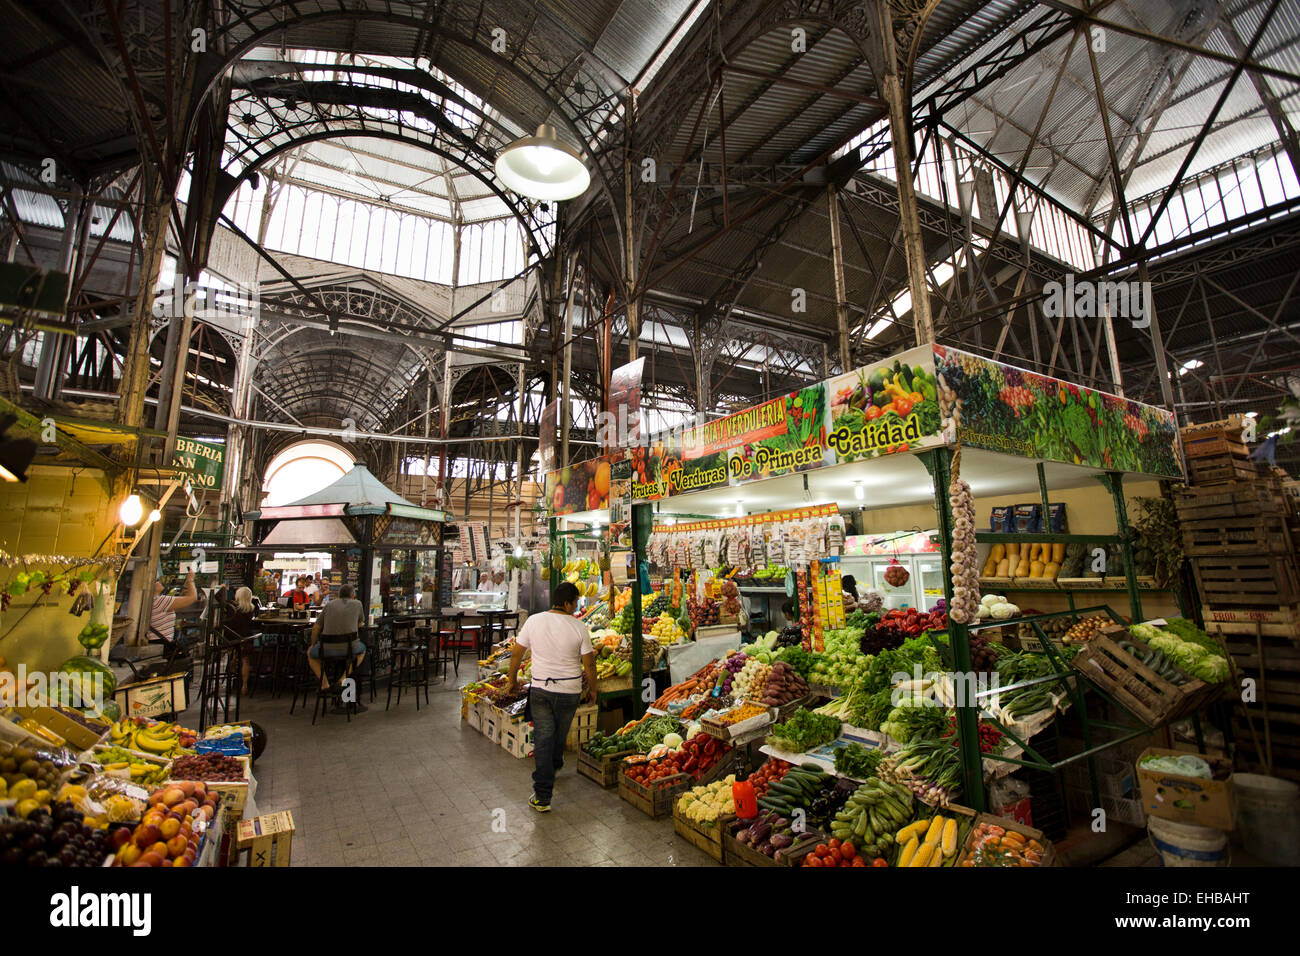 Argentina, Buenos Aires, San Telmo indoor produce market, people at central coffee stall Stock Photo